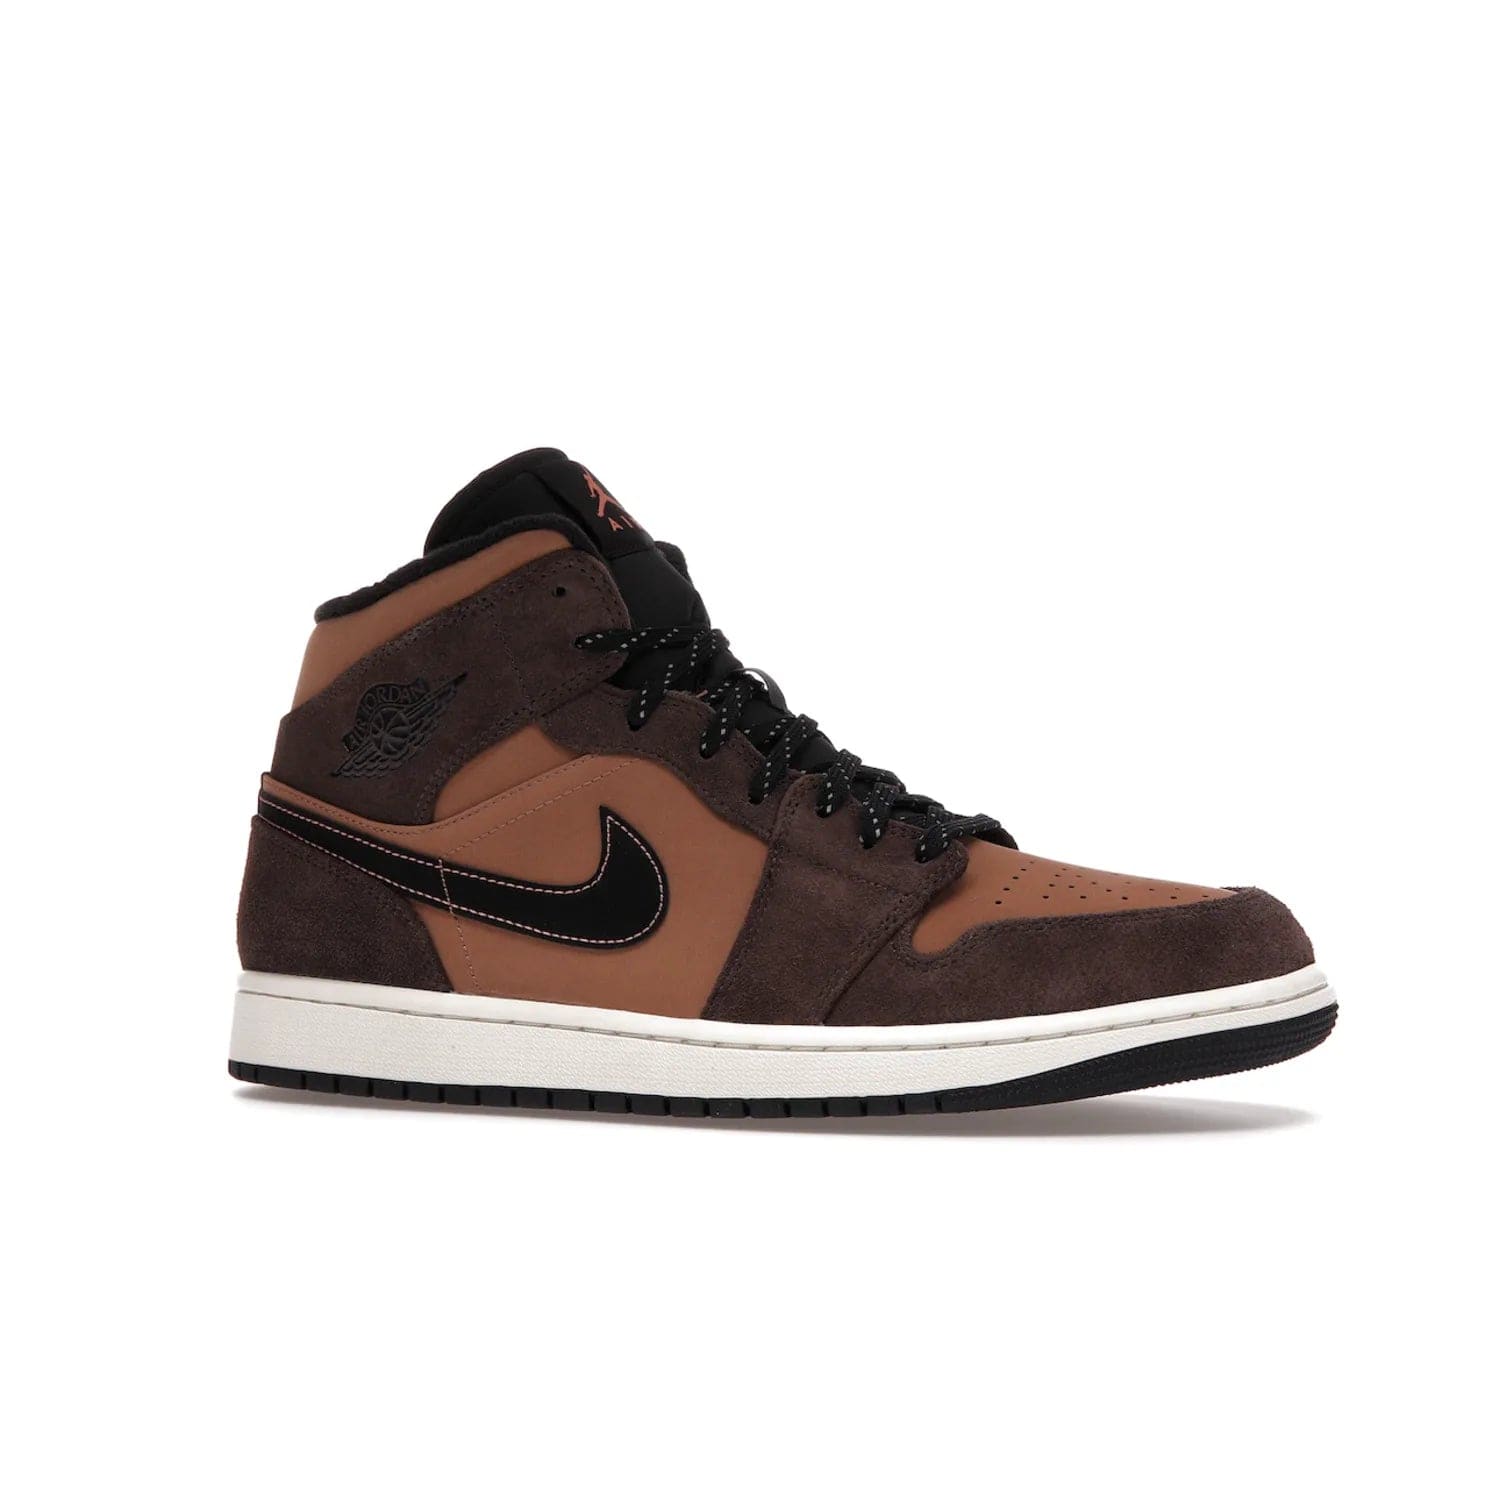 Jordan 1 Mid SE Dark Chocolate - Image 3 - Only at www.BallersClubKickz.com - This fashionable and functional Jordan 1 Mid SE Dark Chocolate features a light brown Durabuck upper, dark brown suede overlays, black Swoosh logos and reflective patch at heel. A must-have for any sneakerhead!